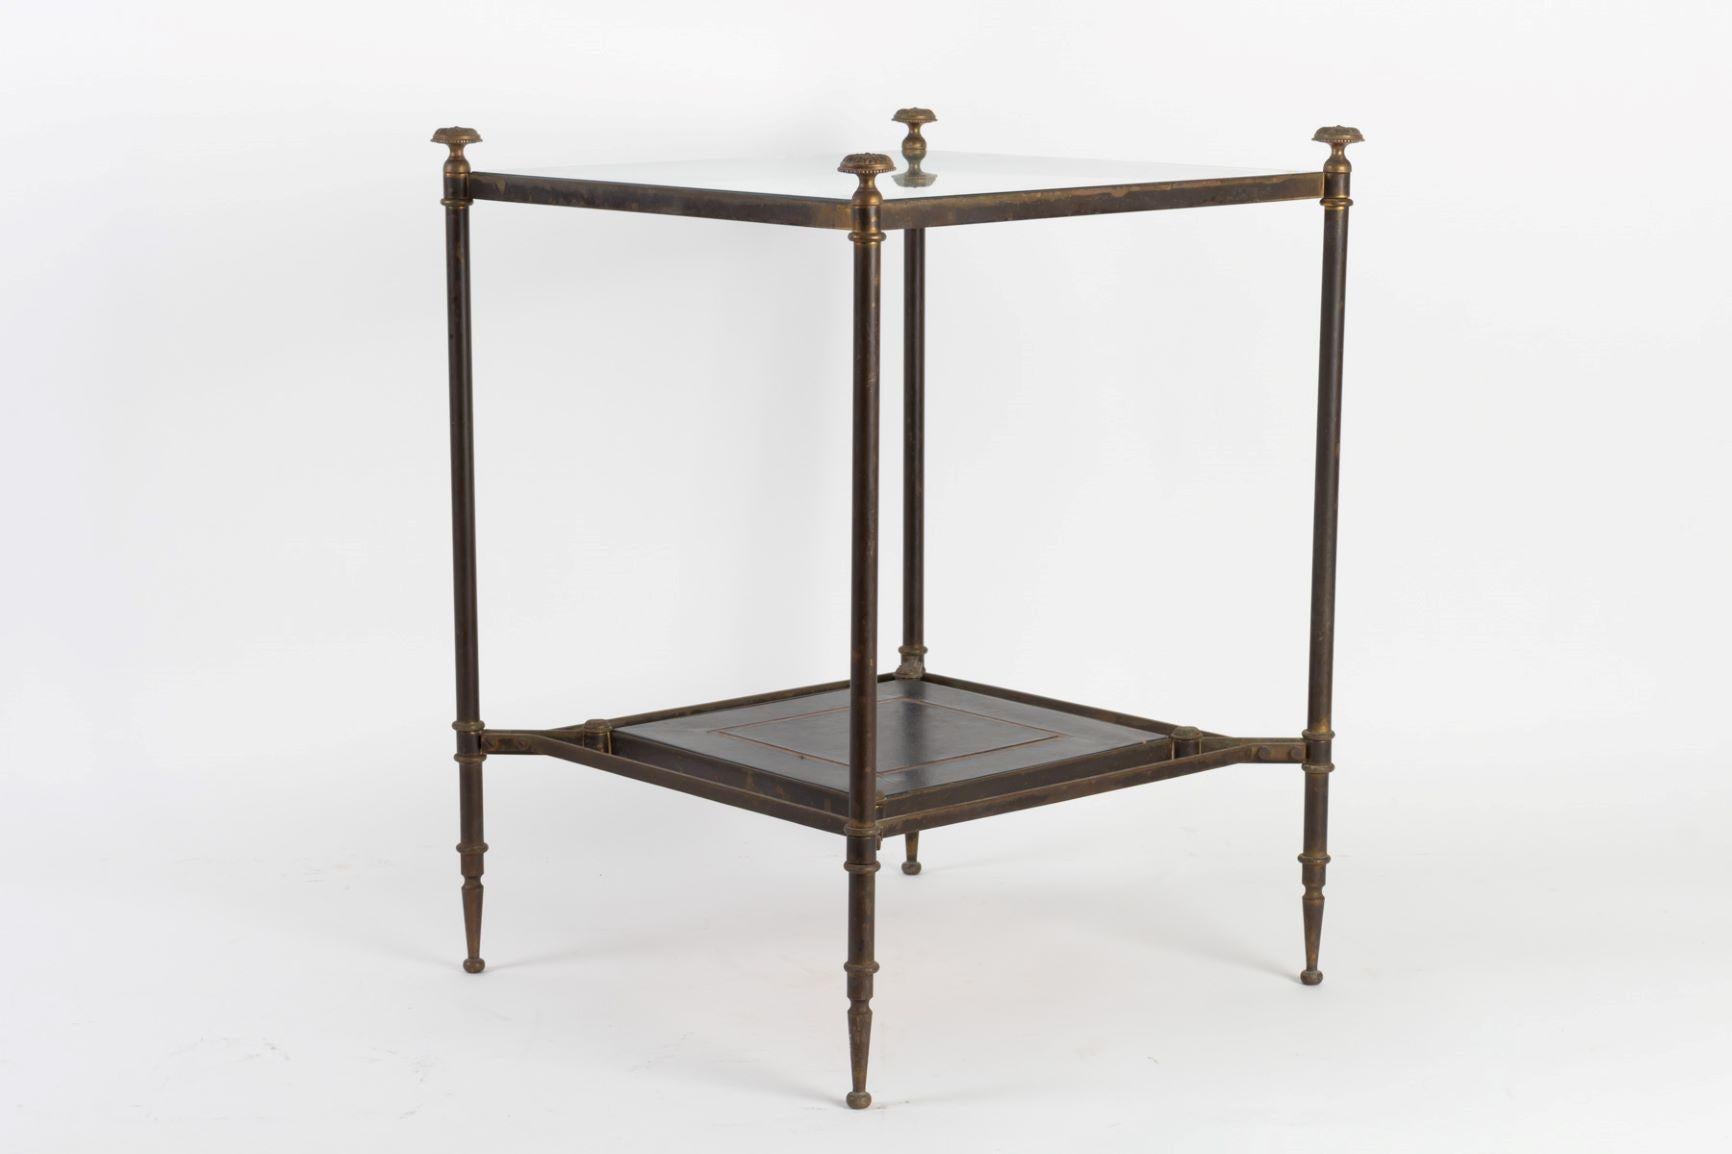 Elegant Pair of Small Square Side Tables Attributed to Maison Jansen 1940s-1950s For Sale 5